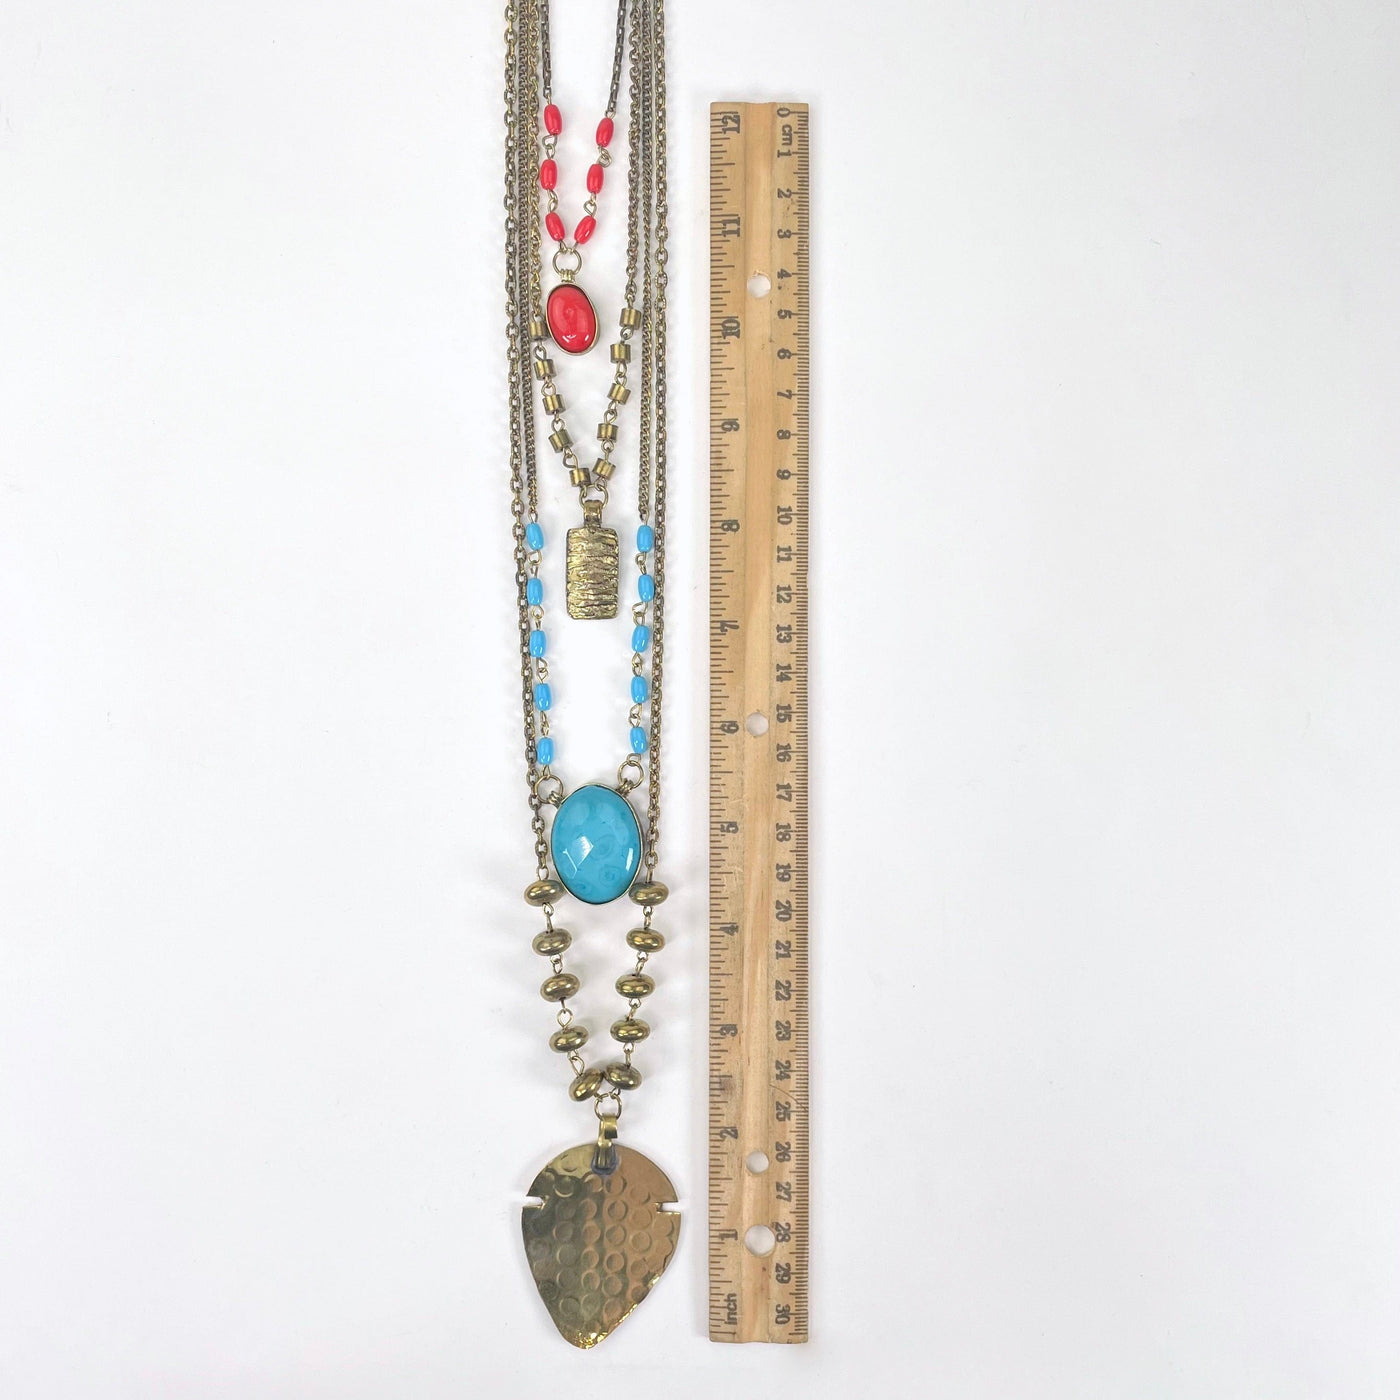 four tier beaded pendant necklace with ruler for size reference